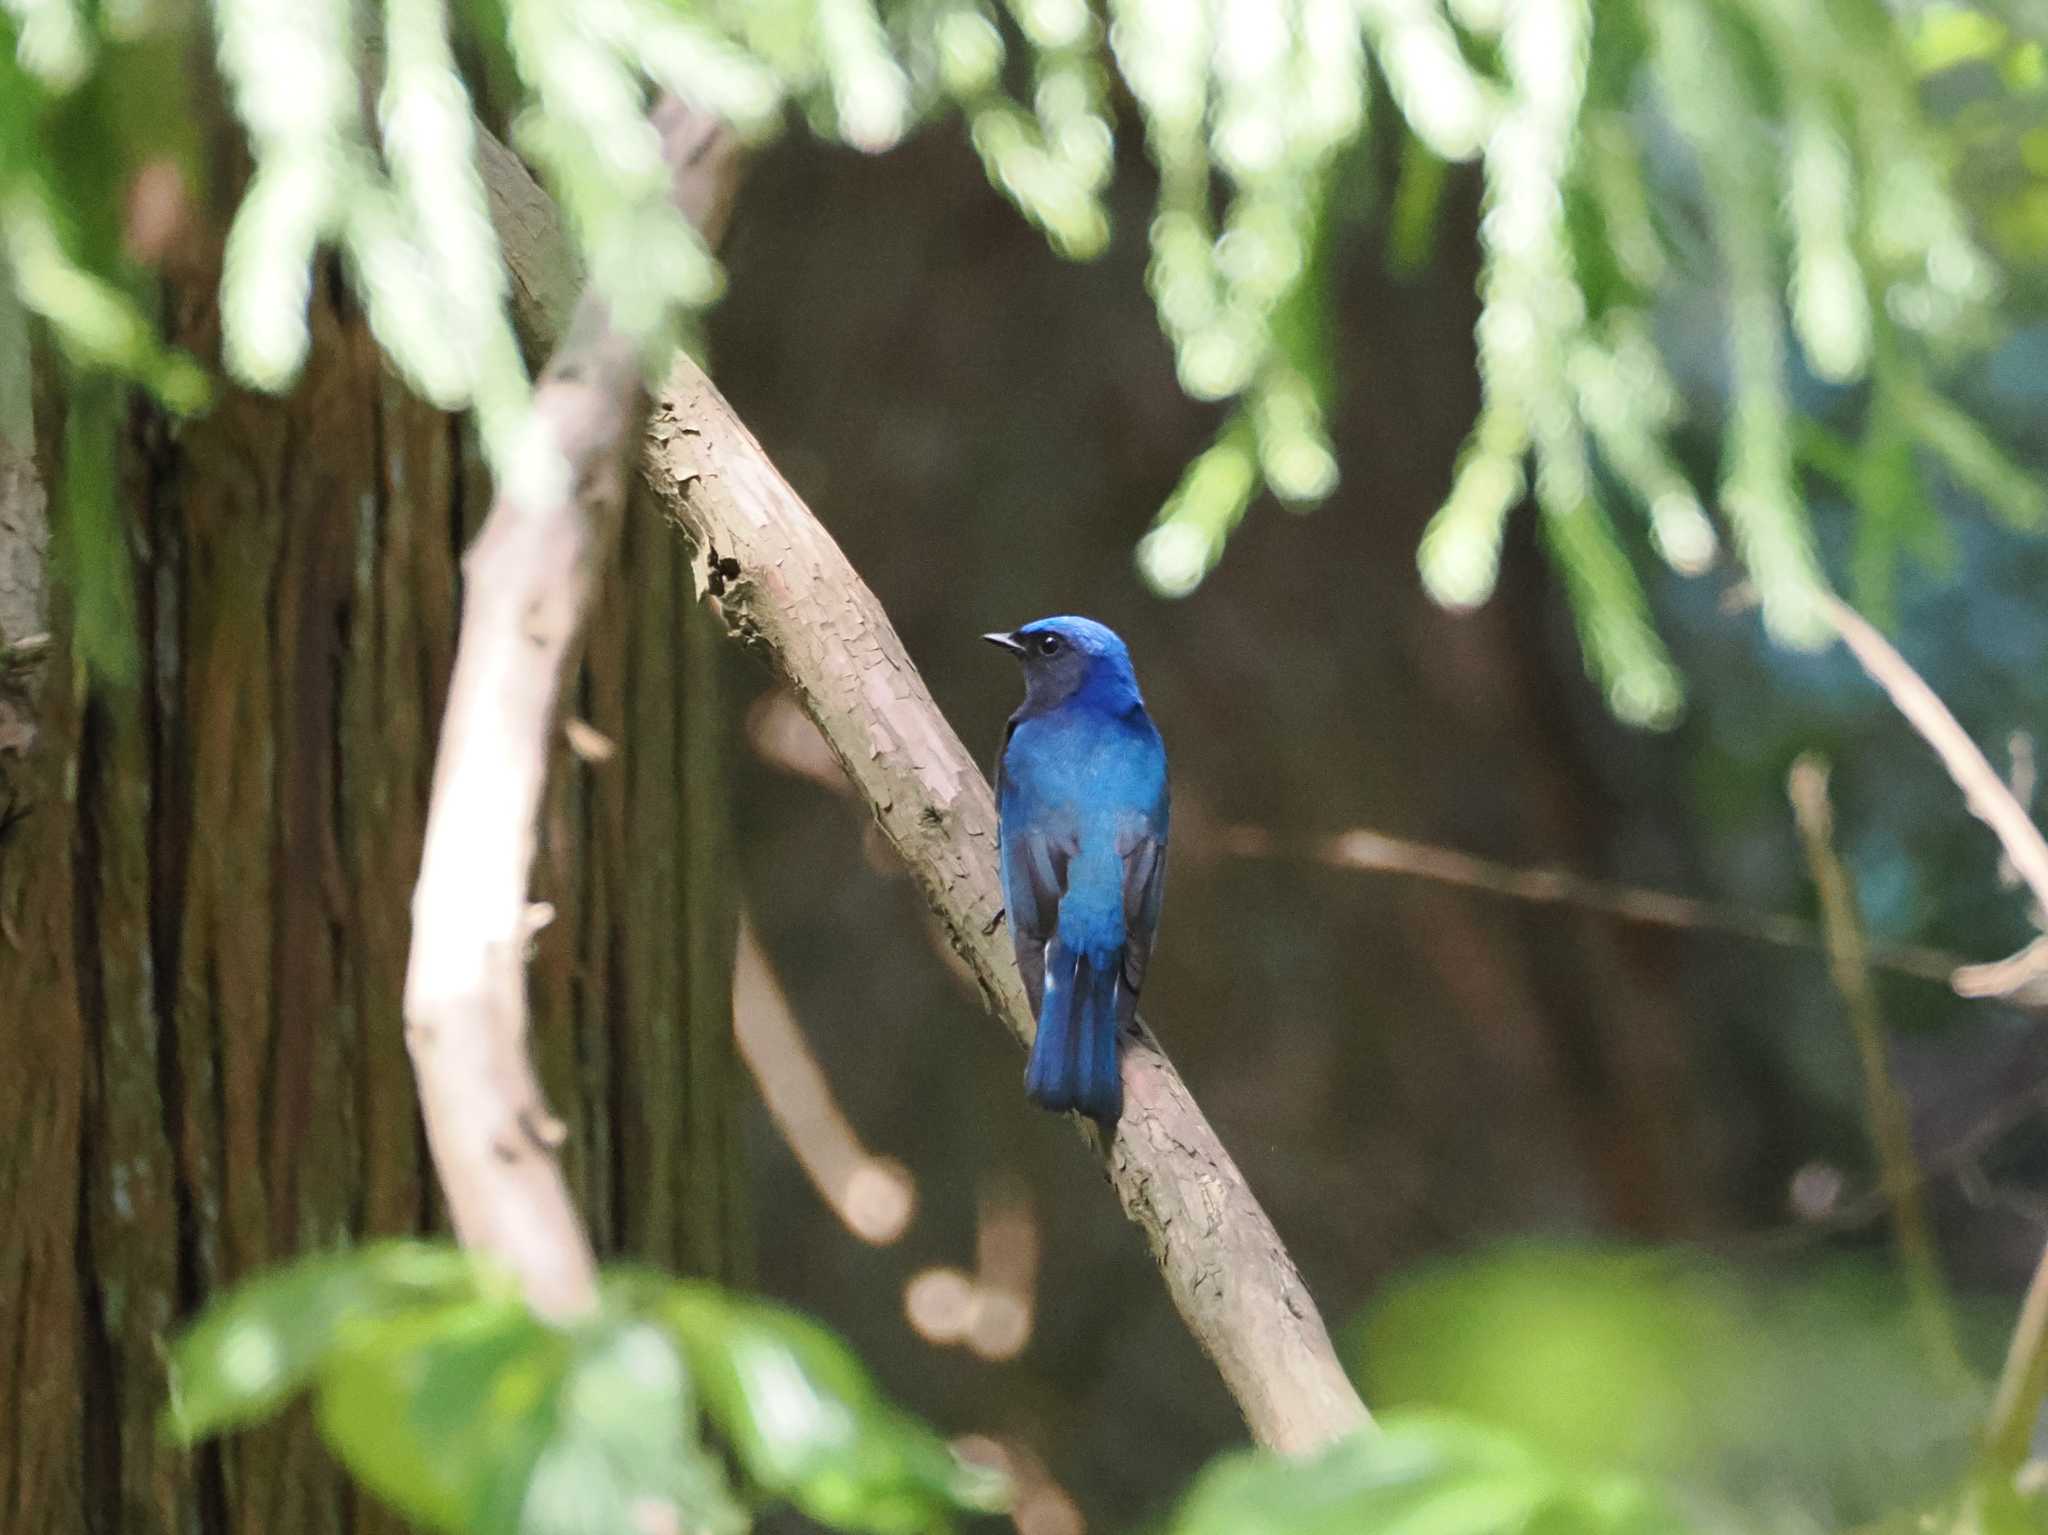 Photo of Blue-and-white Flycatcher at 日向渓谷 by こむぎこねこ